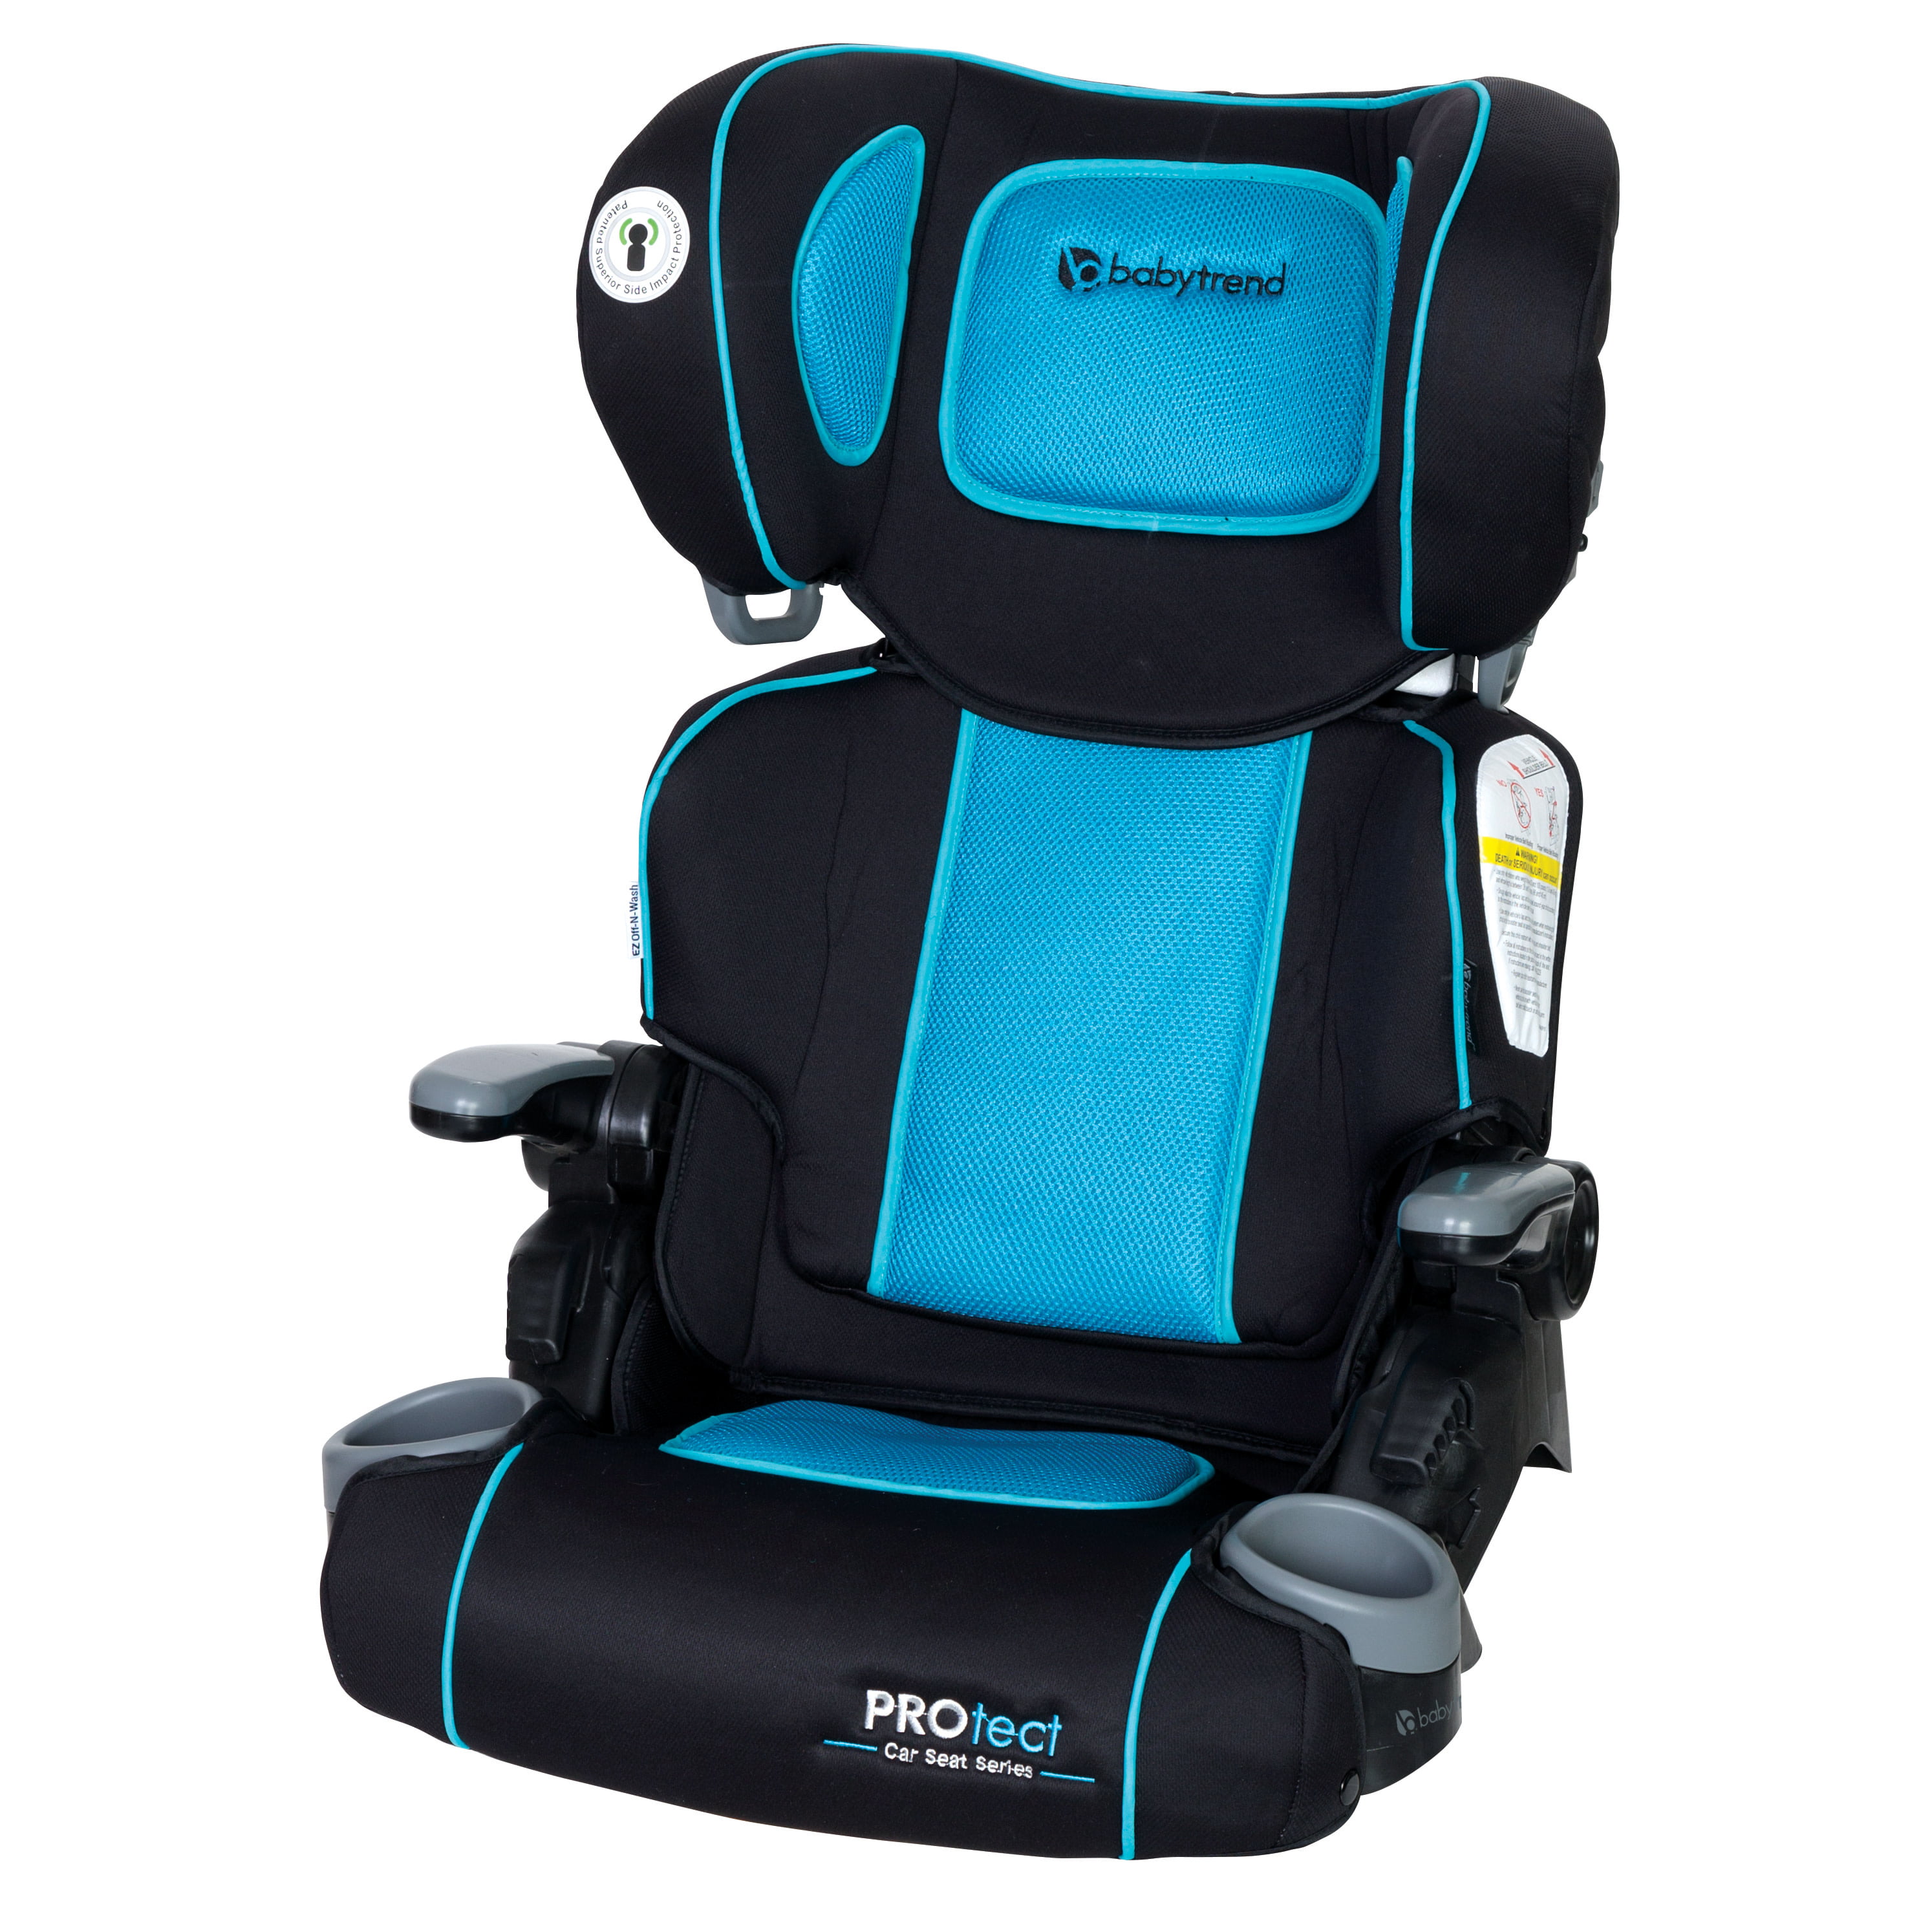 2 in 1 travel seat